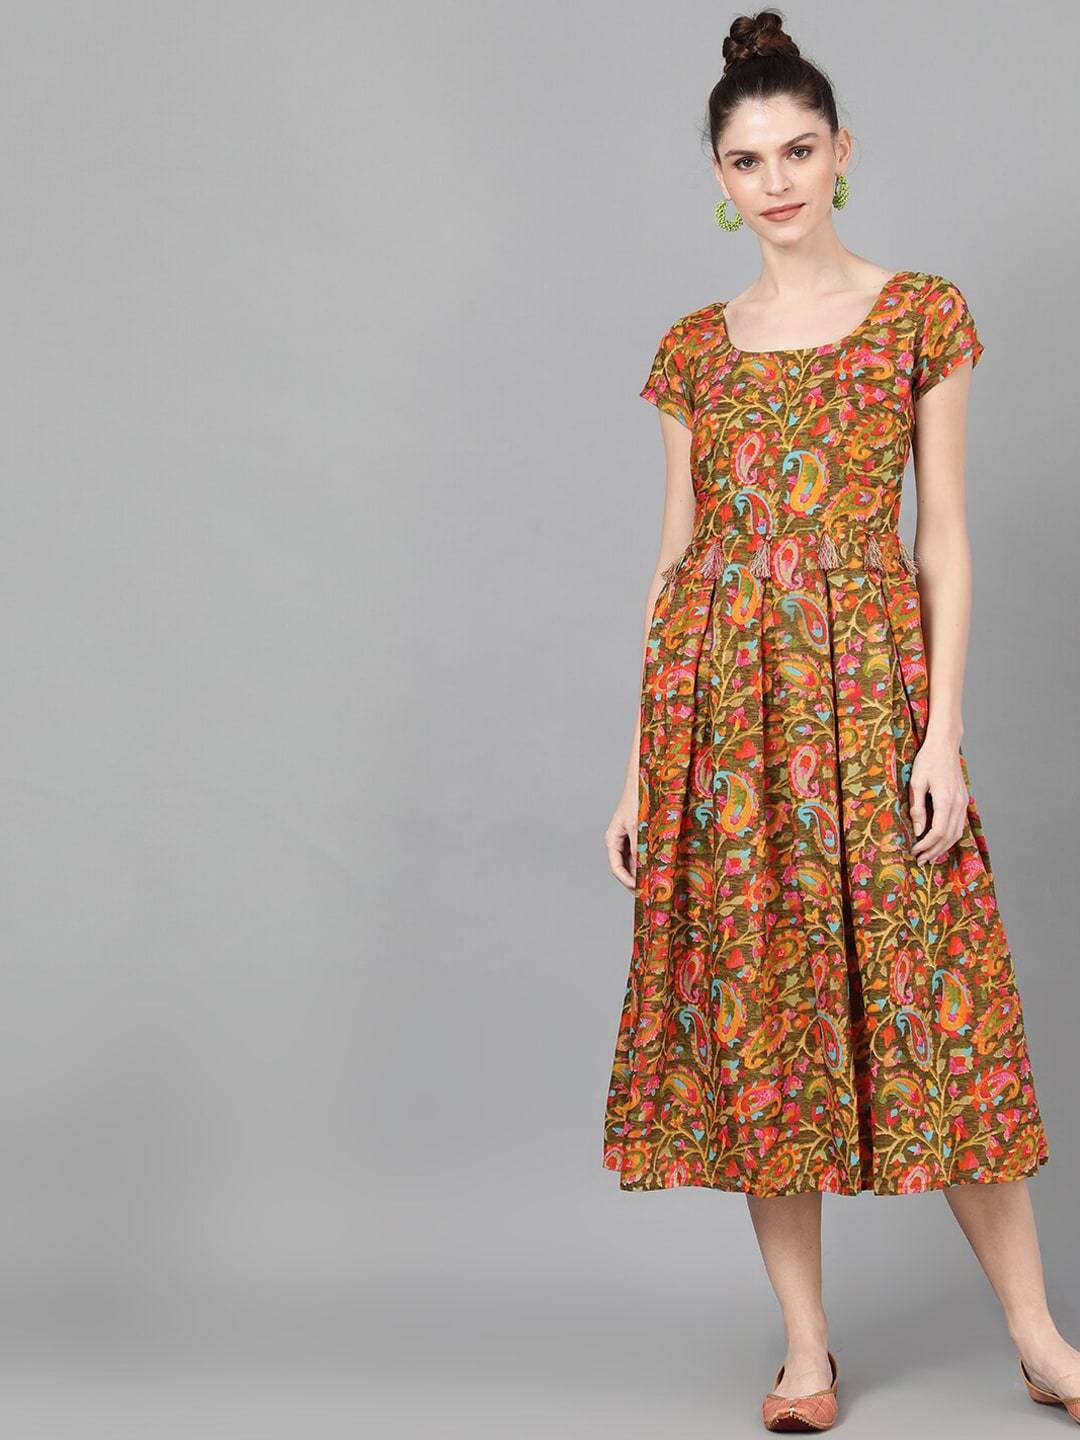 Women's  Olive Green & Orange Floral Printed Fit and Flare Dress - AKS